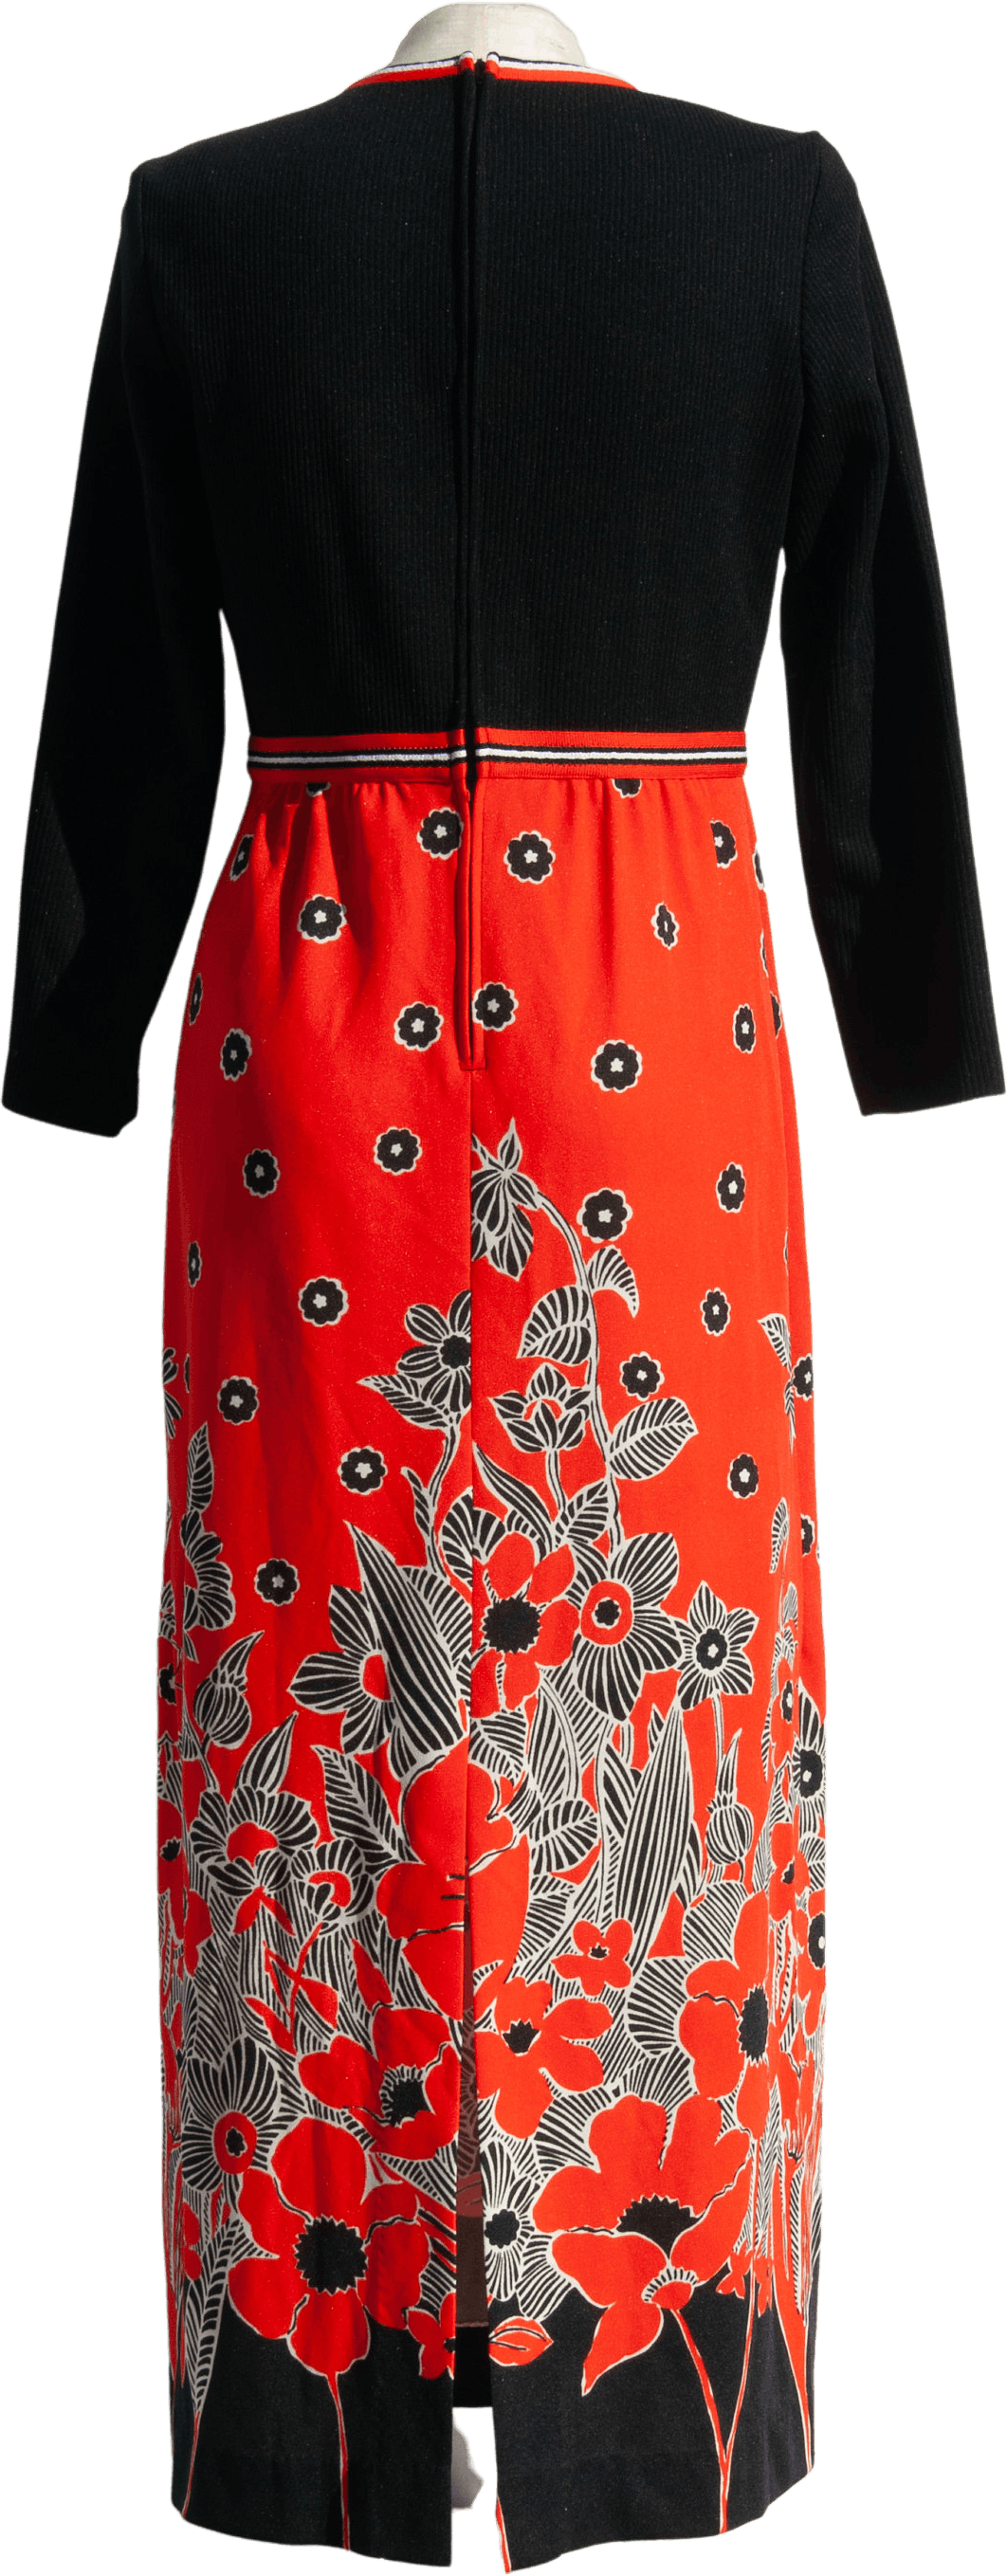 Vintage 70s Black And Red Poppy Print Long Sleeve Maxi Dress Shop Thrilling 